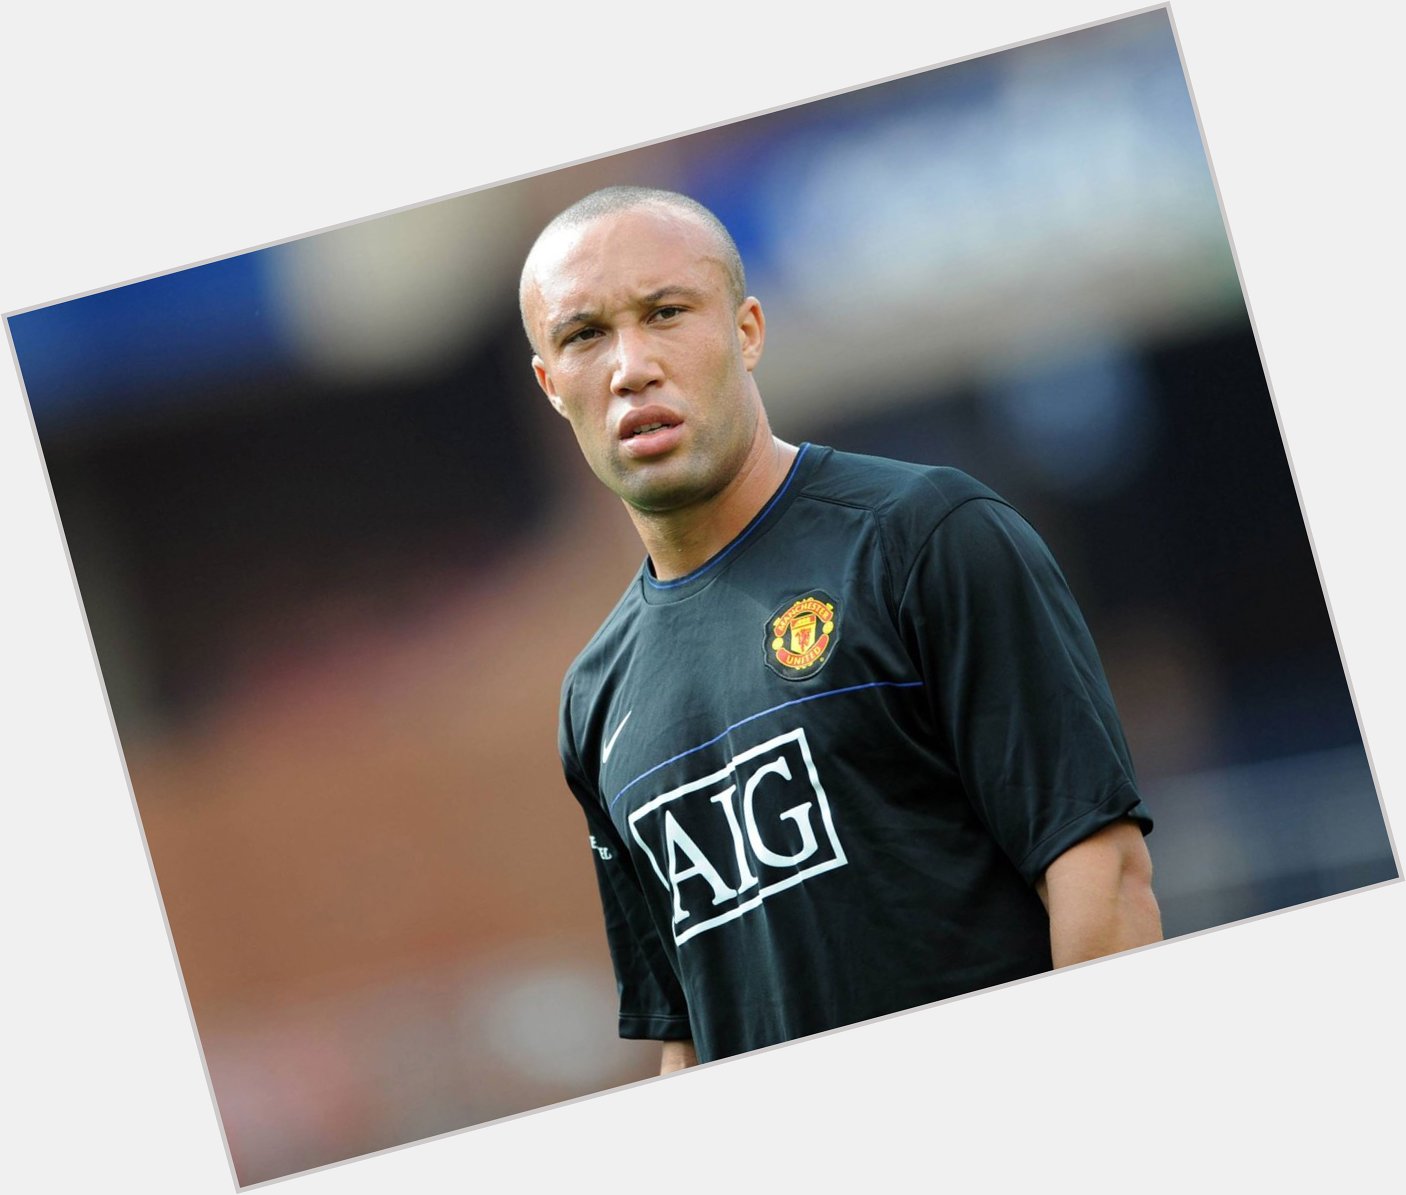 Happy birthday to former Manchester United, Arsenal and France defender Mikael Silvestre, who turns 40 today! 